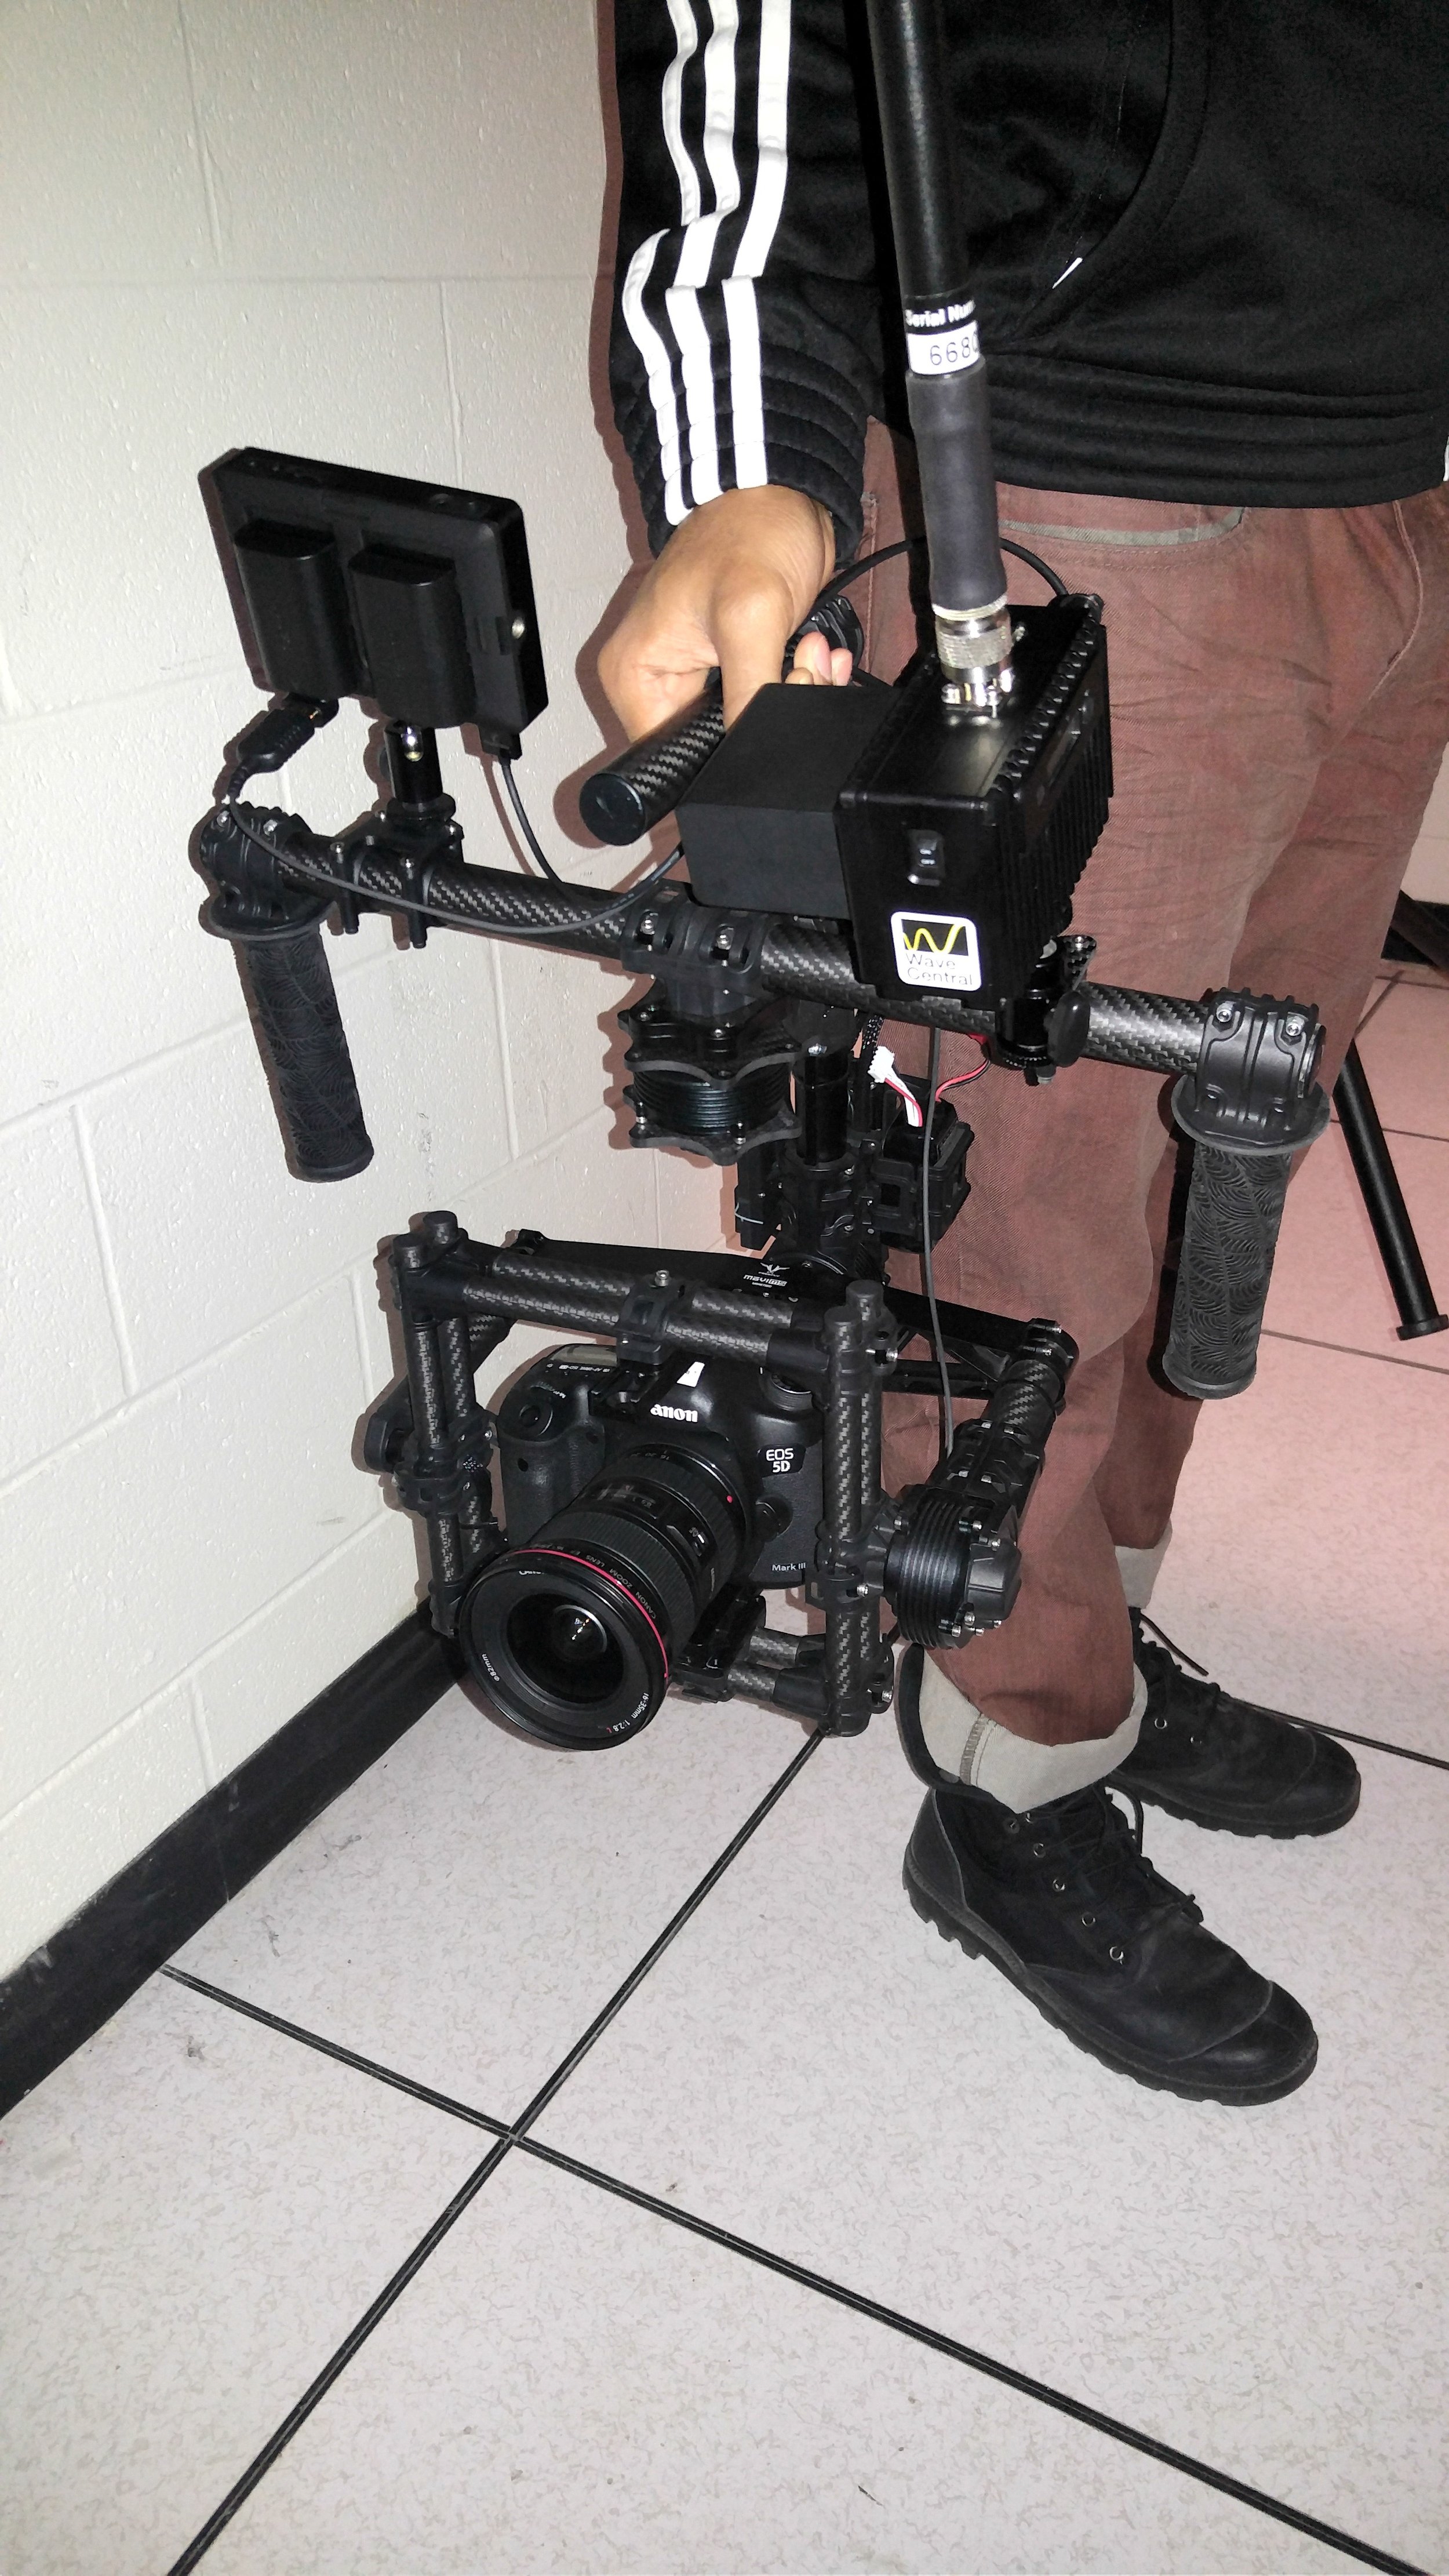 Spurs Sports & Entertainment - Movi Camera Rig with WC 5.8G Mini TX.jpg